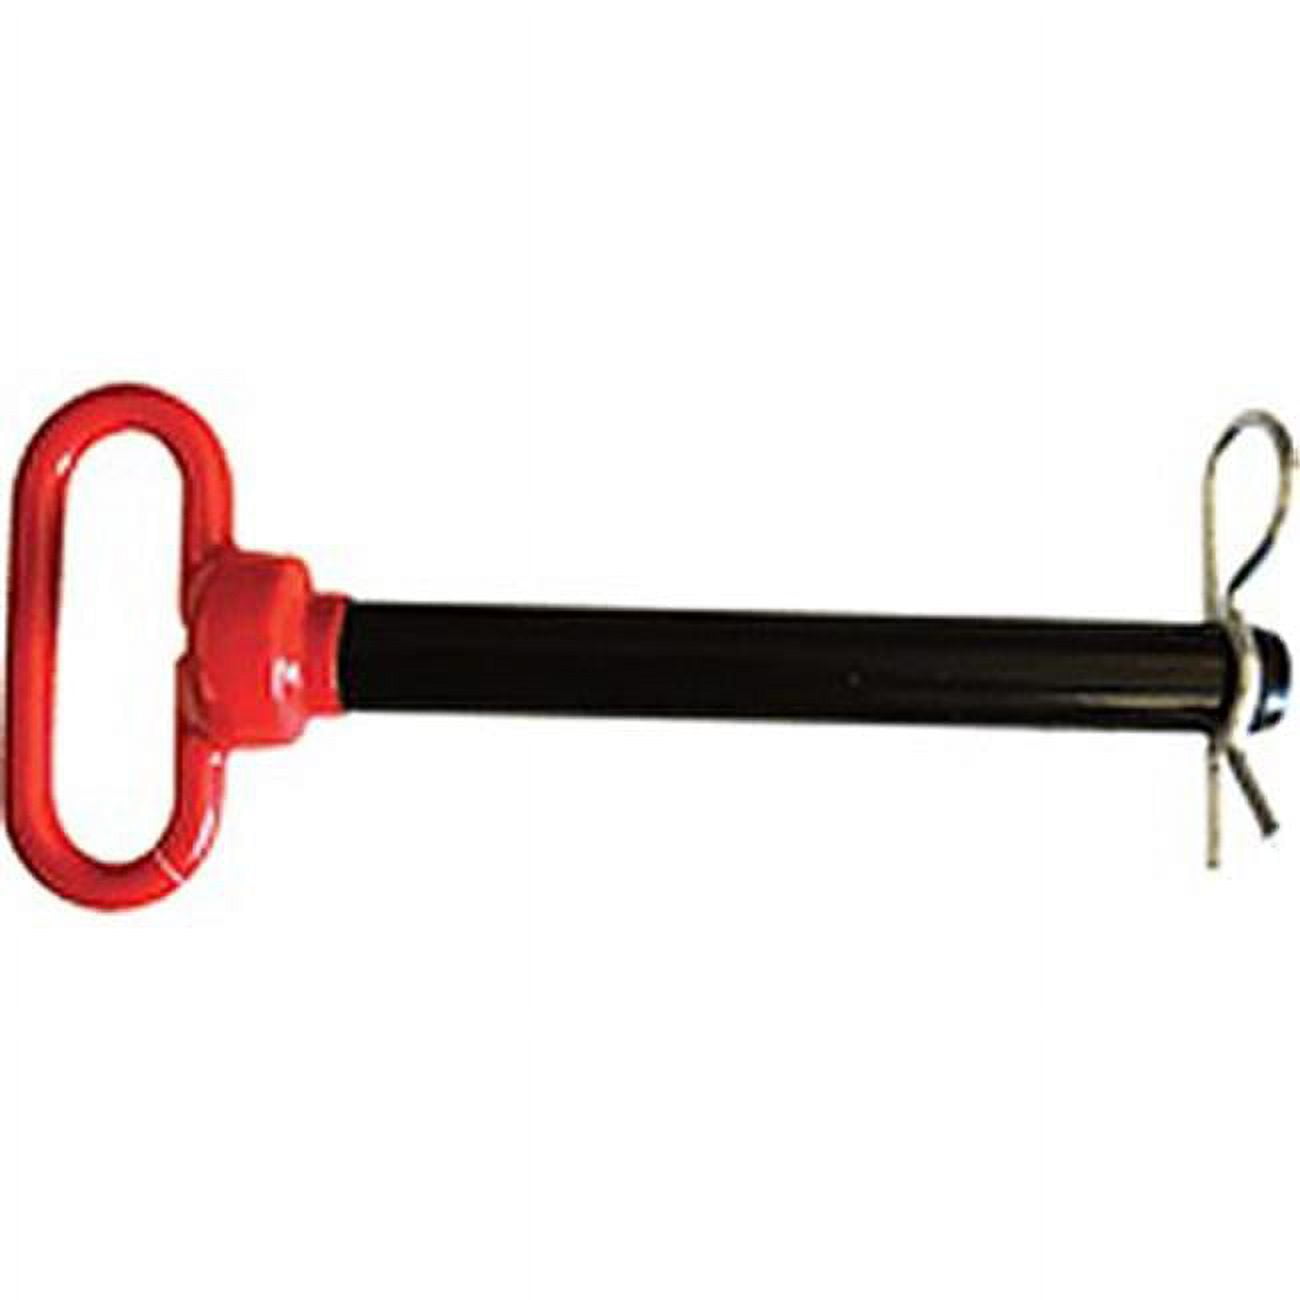 T3898976 0.88 X 6.5 In. Campbell Red Head Hitch Pin